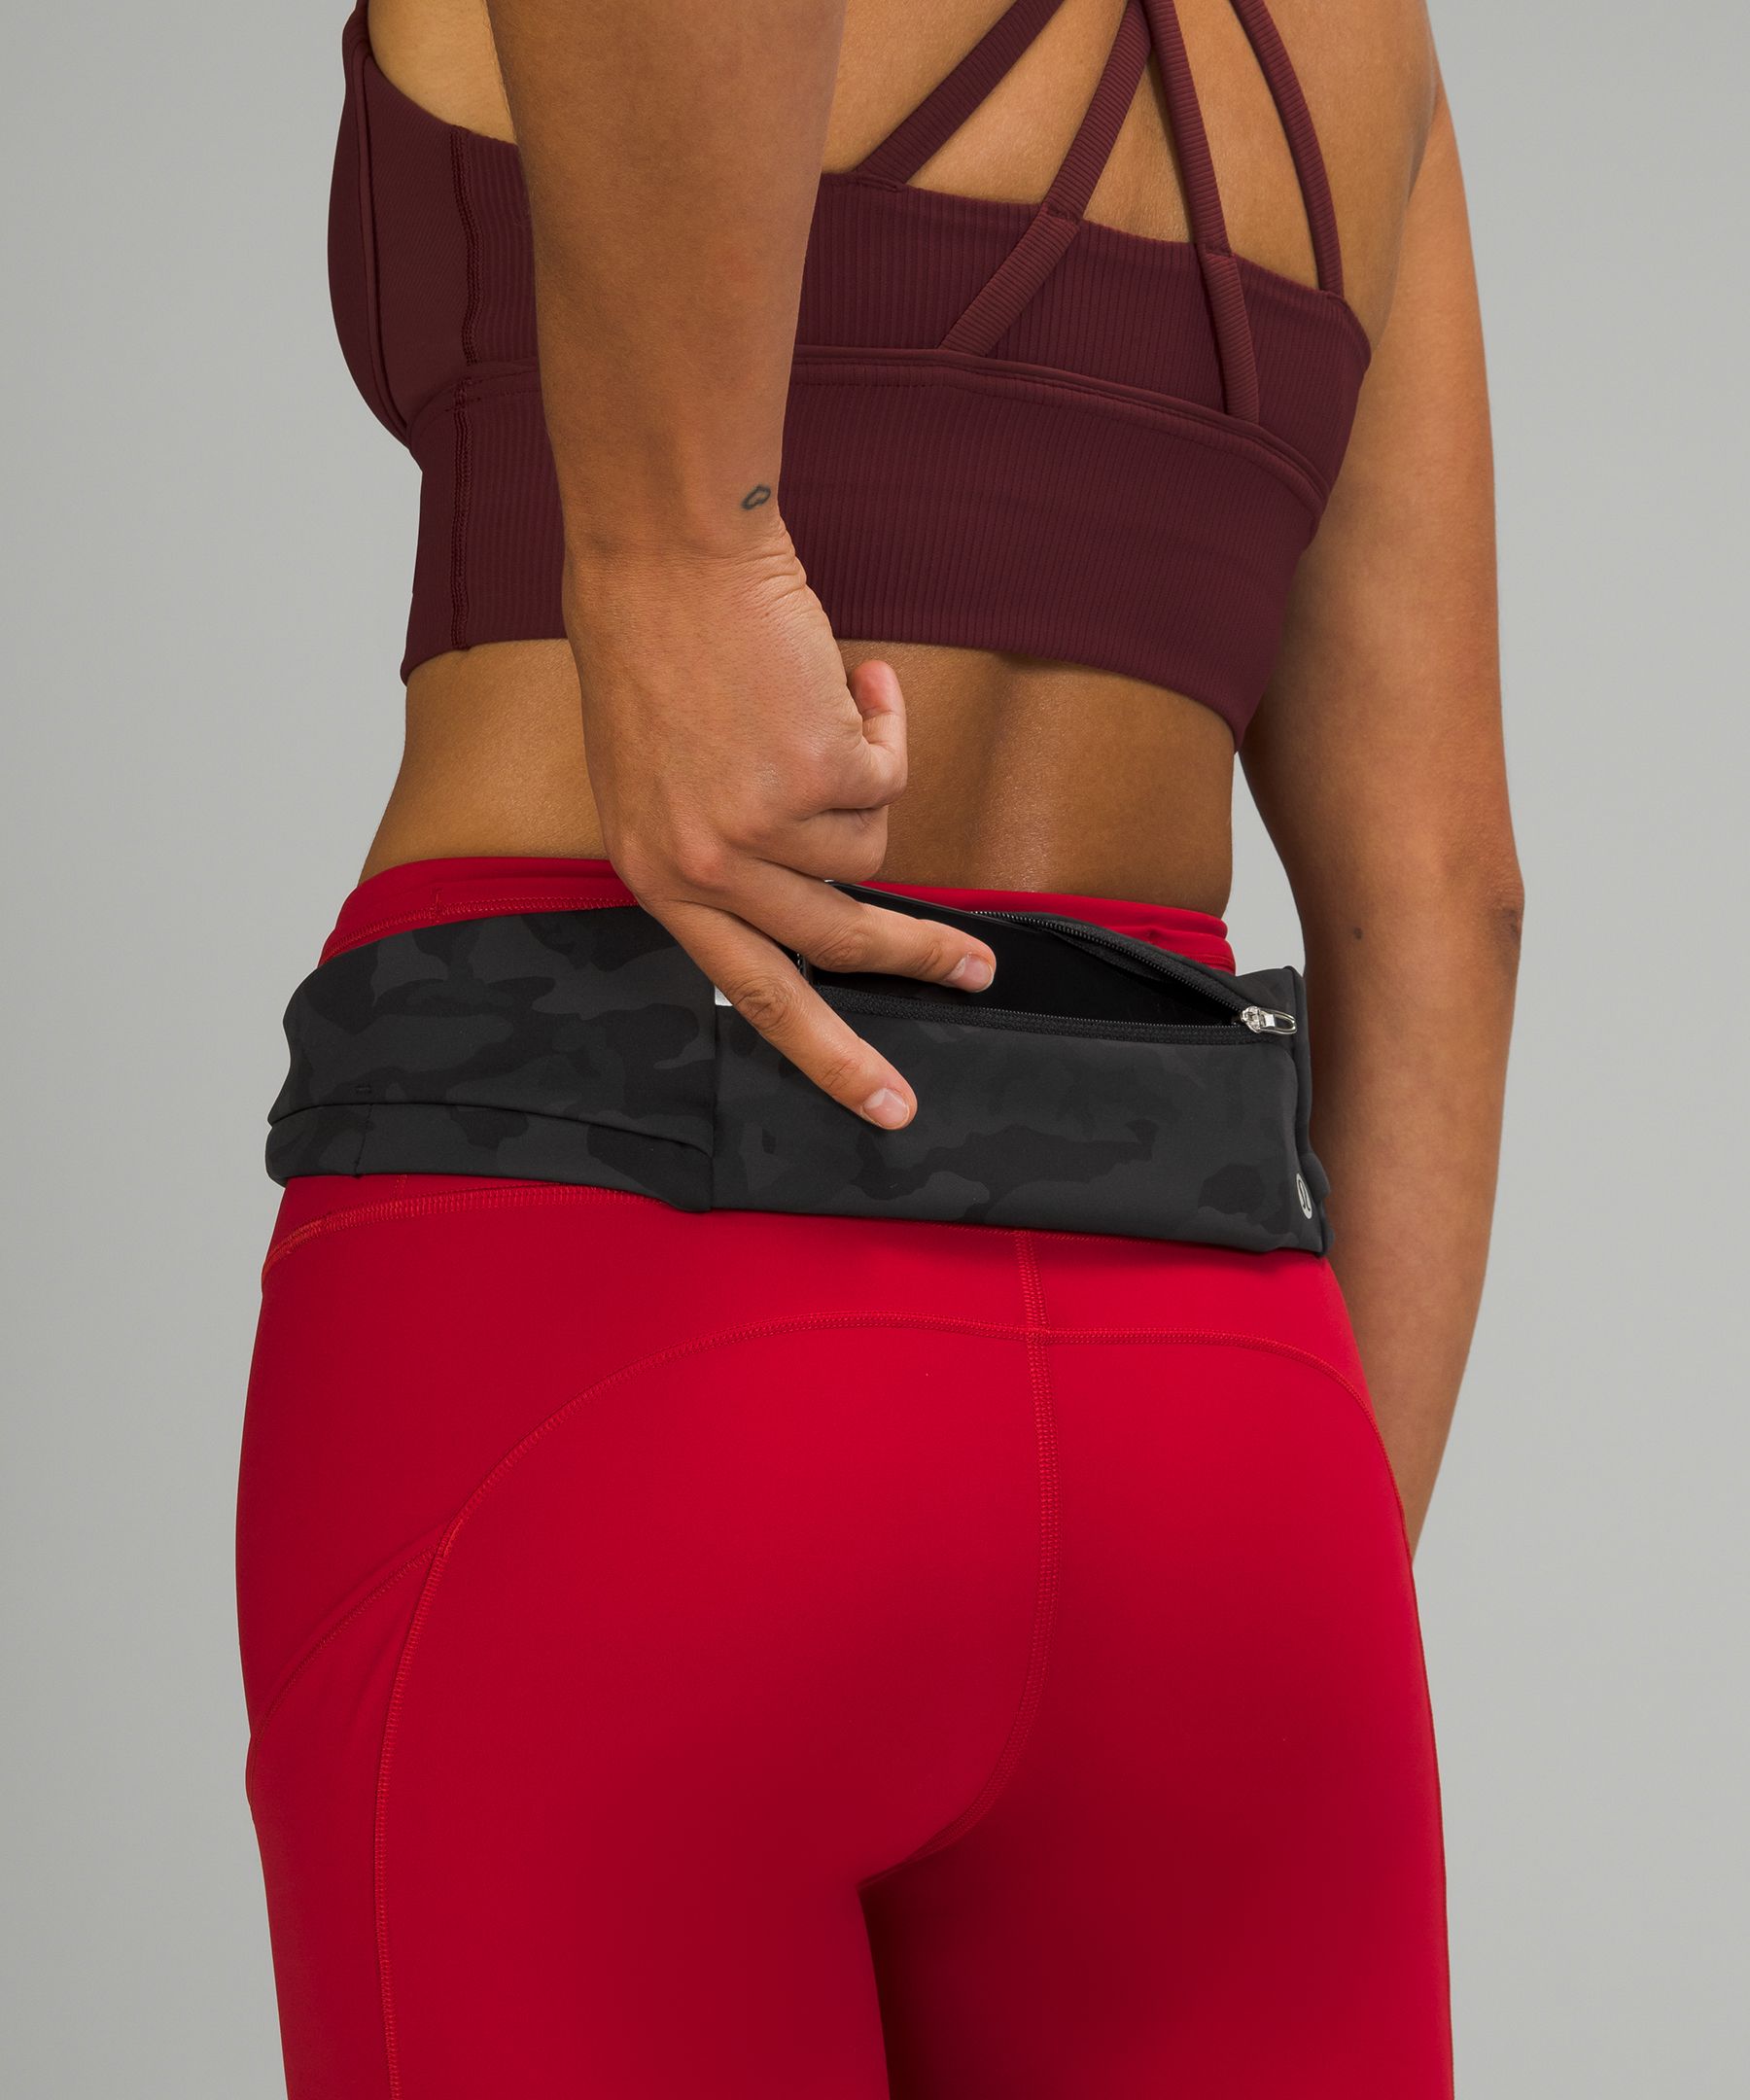 Lululemon Fast And Free Running Belt Review